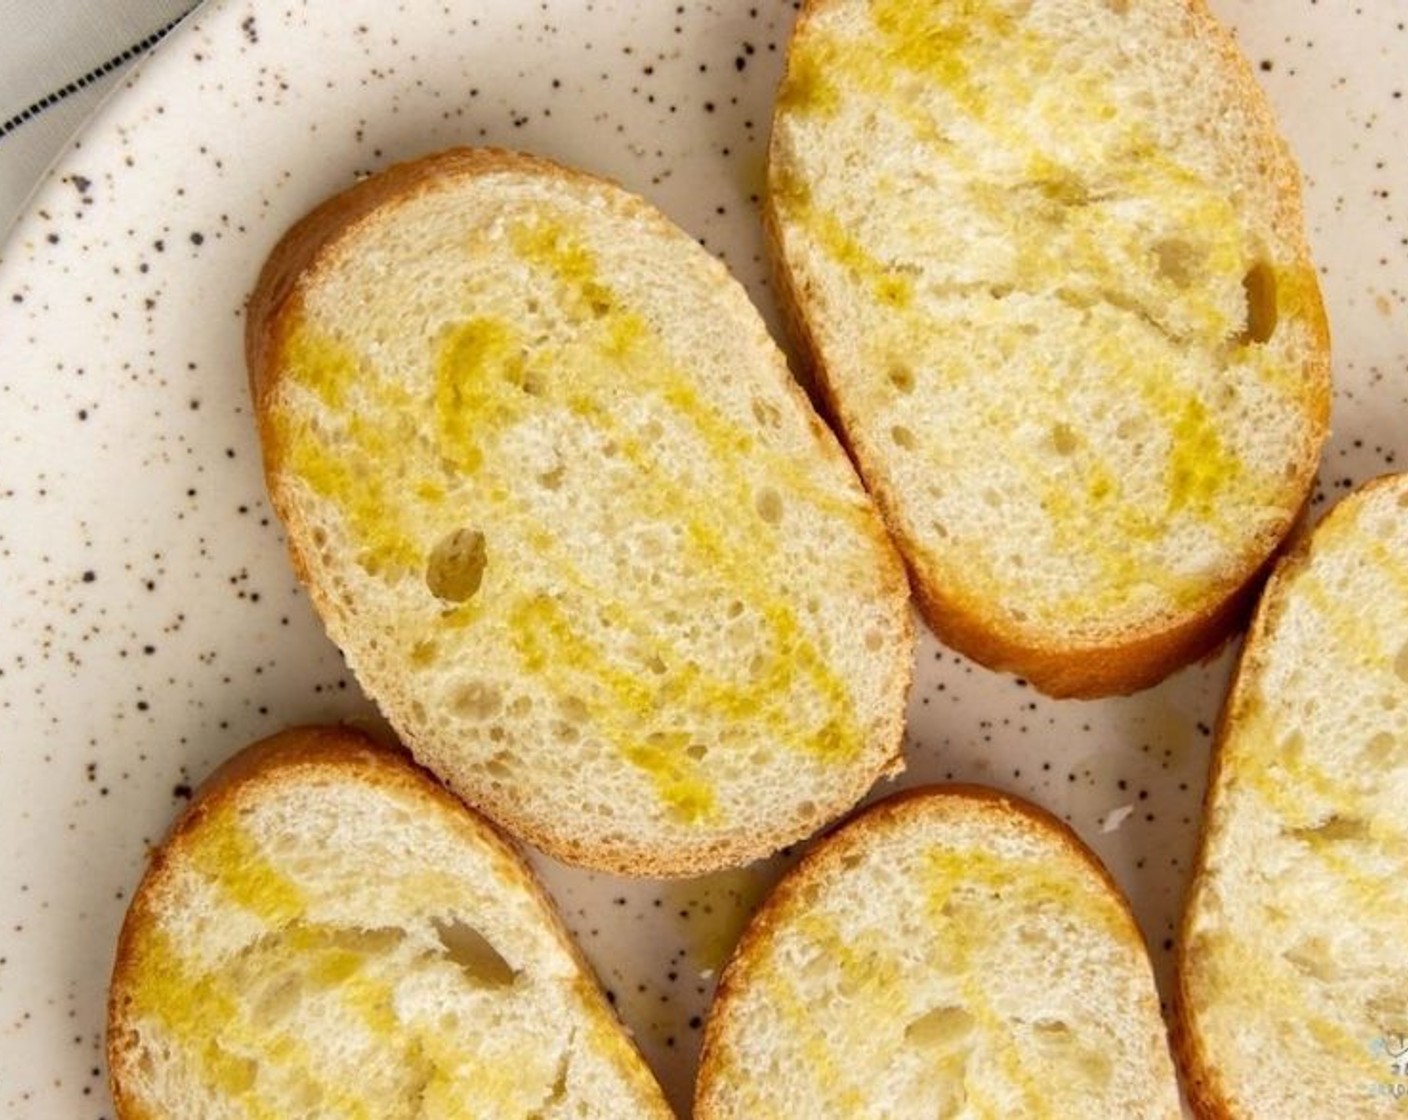 step 2 Brush the Baguettes (10 slices) with Olive Oil (1 Tbsp) and toast in the oven for 10 minutes or until lightly golden.